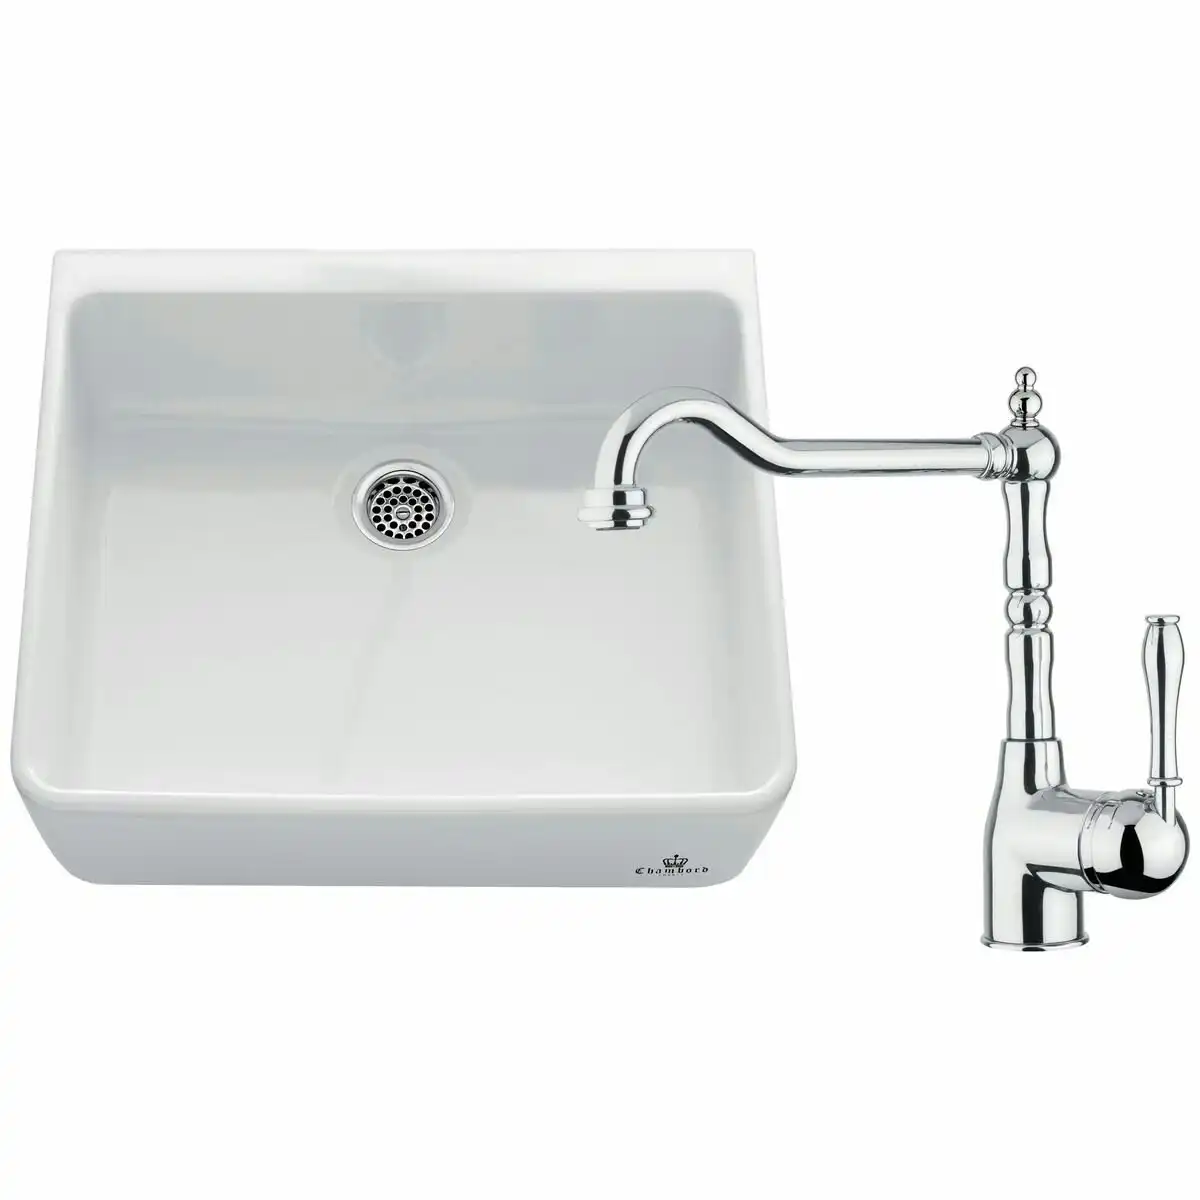 Abey Chambord Clotaire Single Bowl Sink Pack